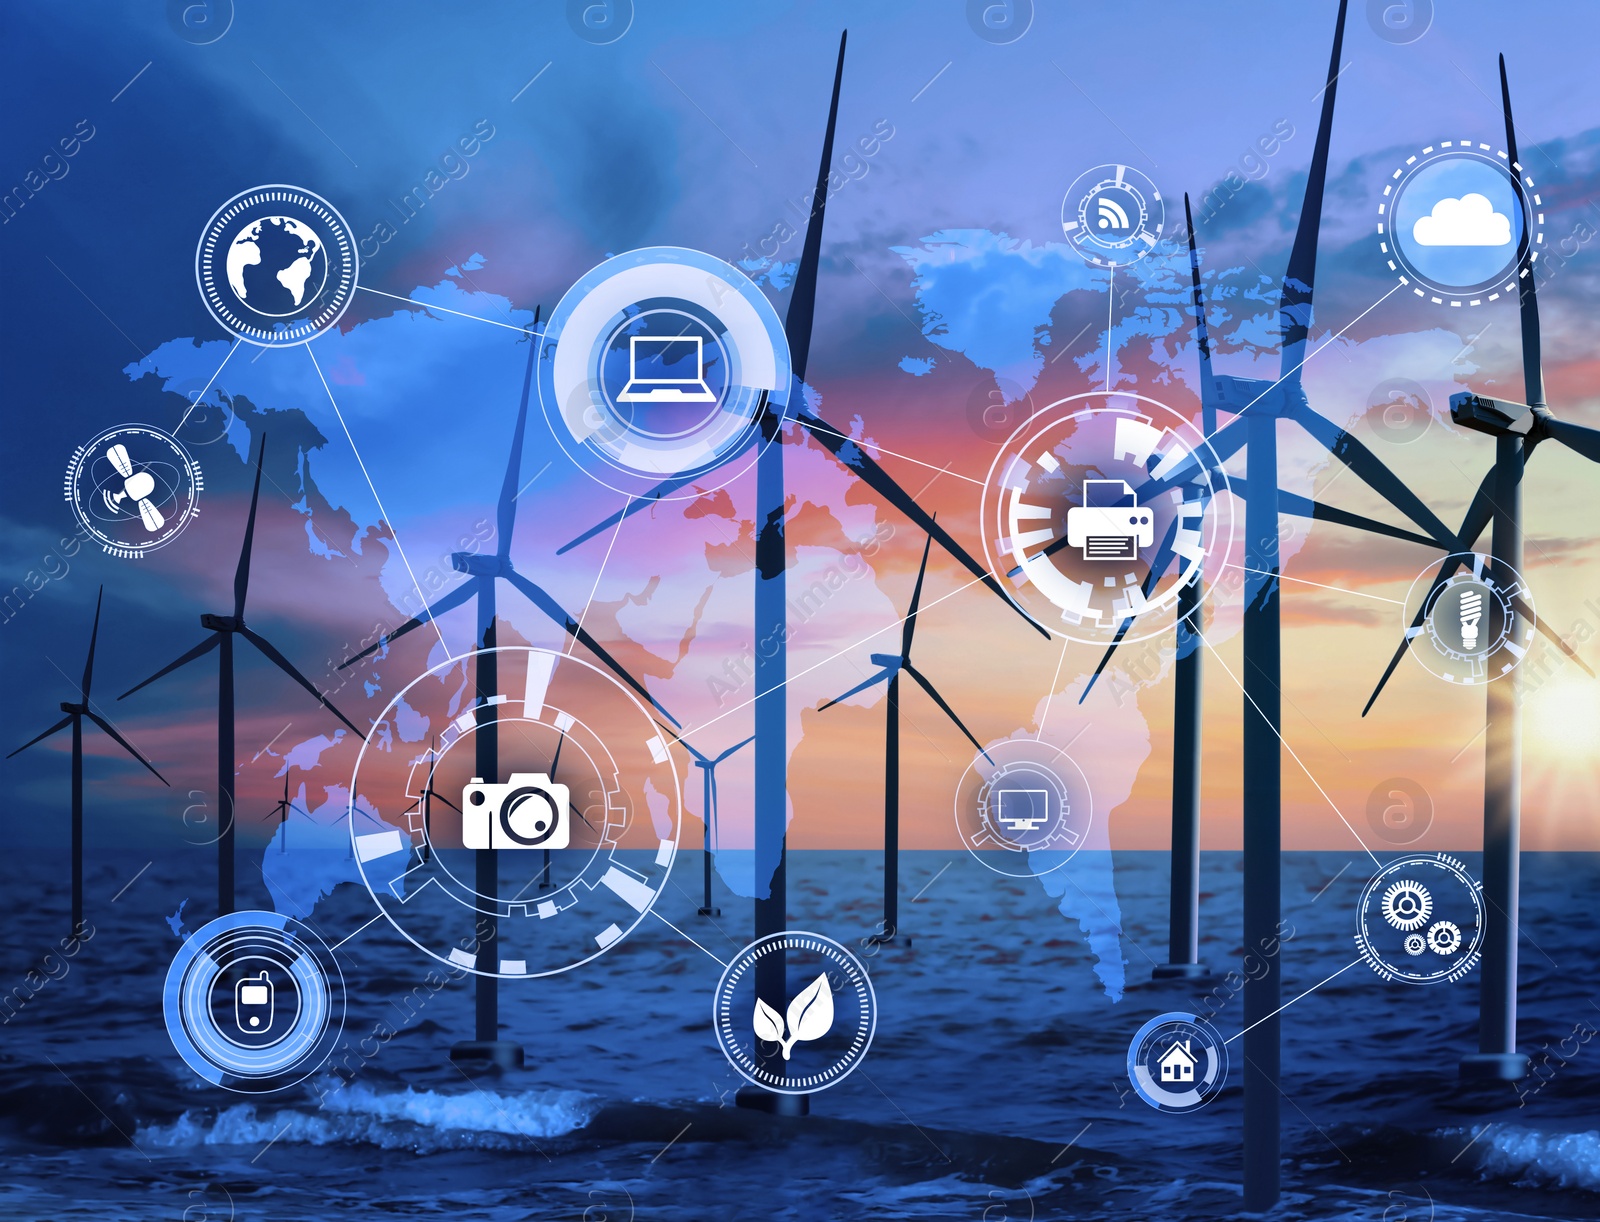 Image of Alternative energy source. Floating wind turbines in sea, world map illustration and scheme